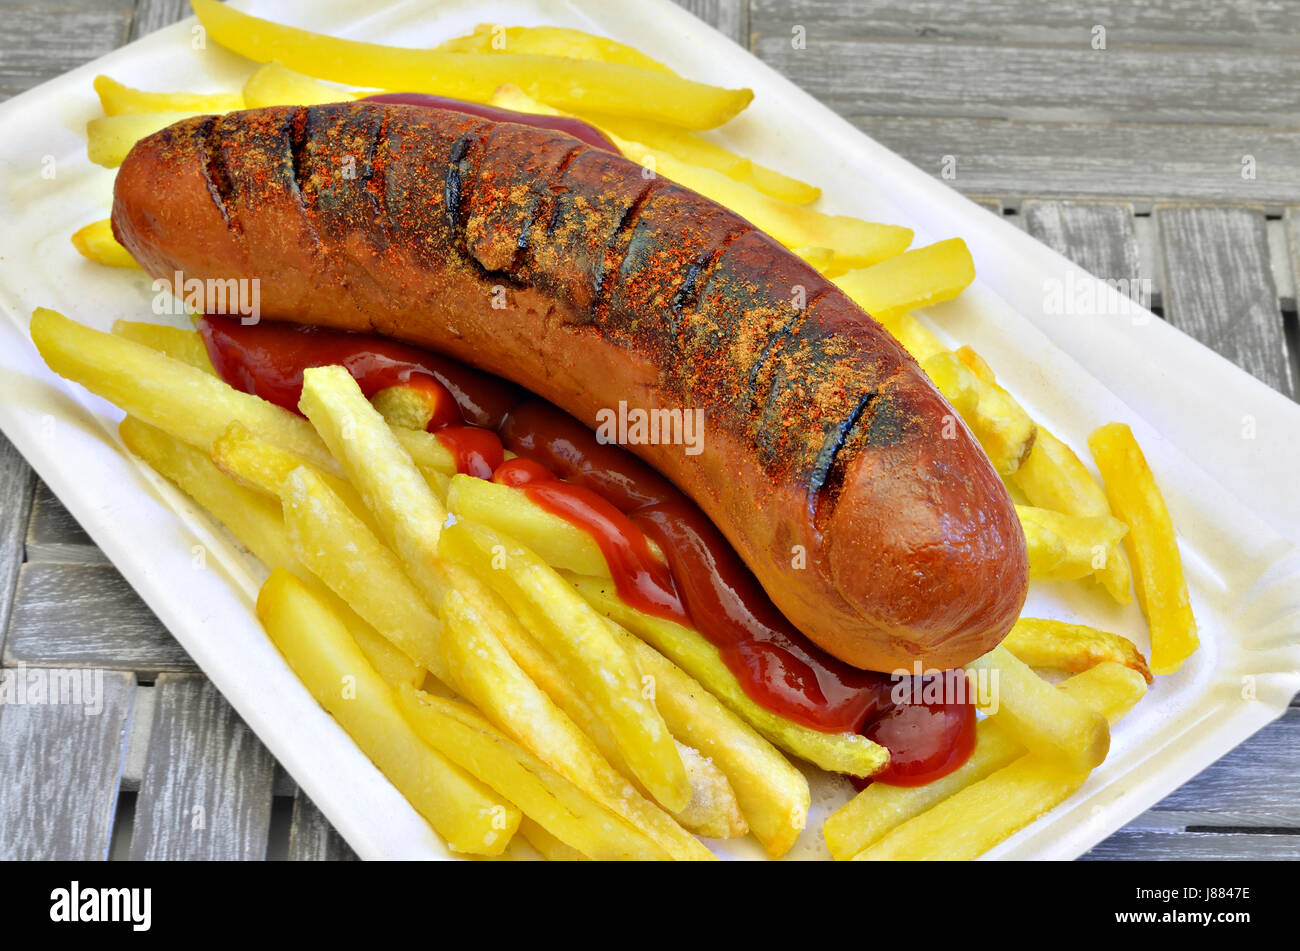 fried sausage with french fried potatoes and ketchup on paper plate, close up, macro, full frame Stock Photo